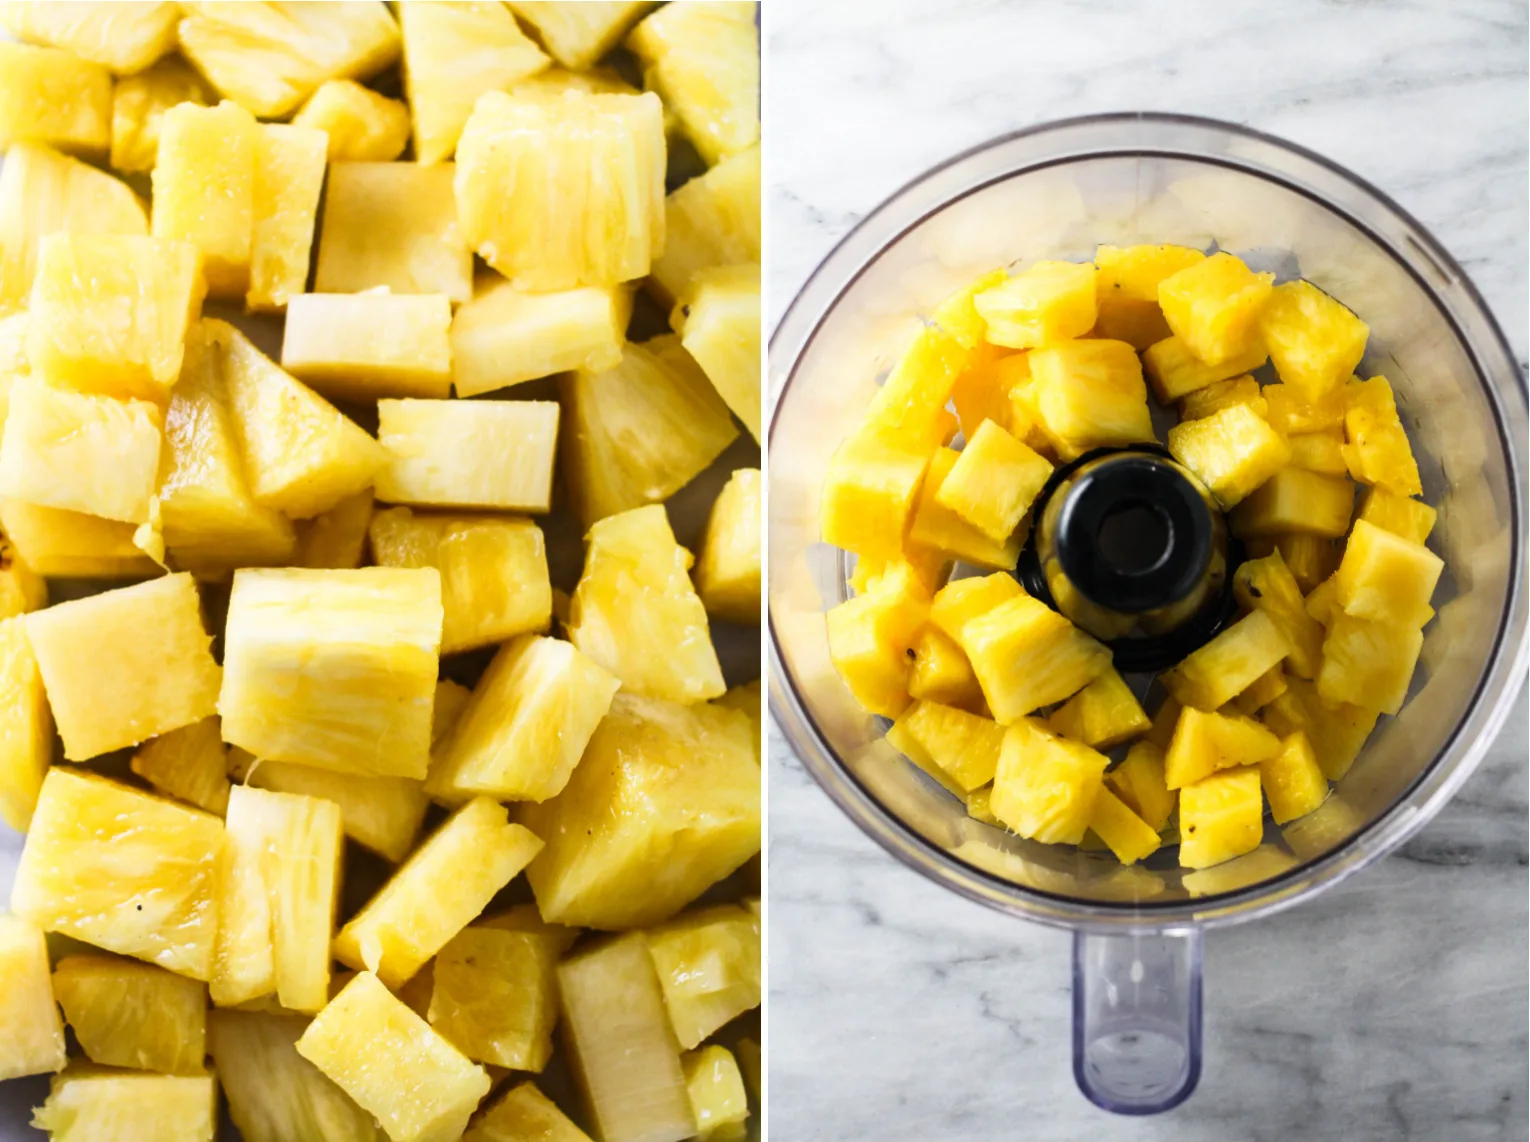 Collage of side-by-side images. On the left, an image of chopped pineapple. On the right, an image of chopped pineapple inside a blender bowl.